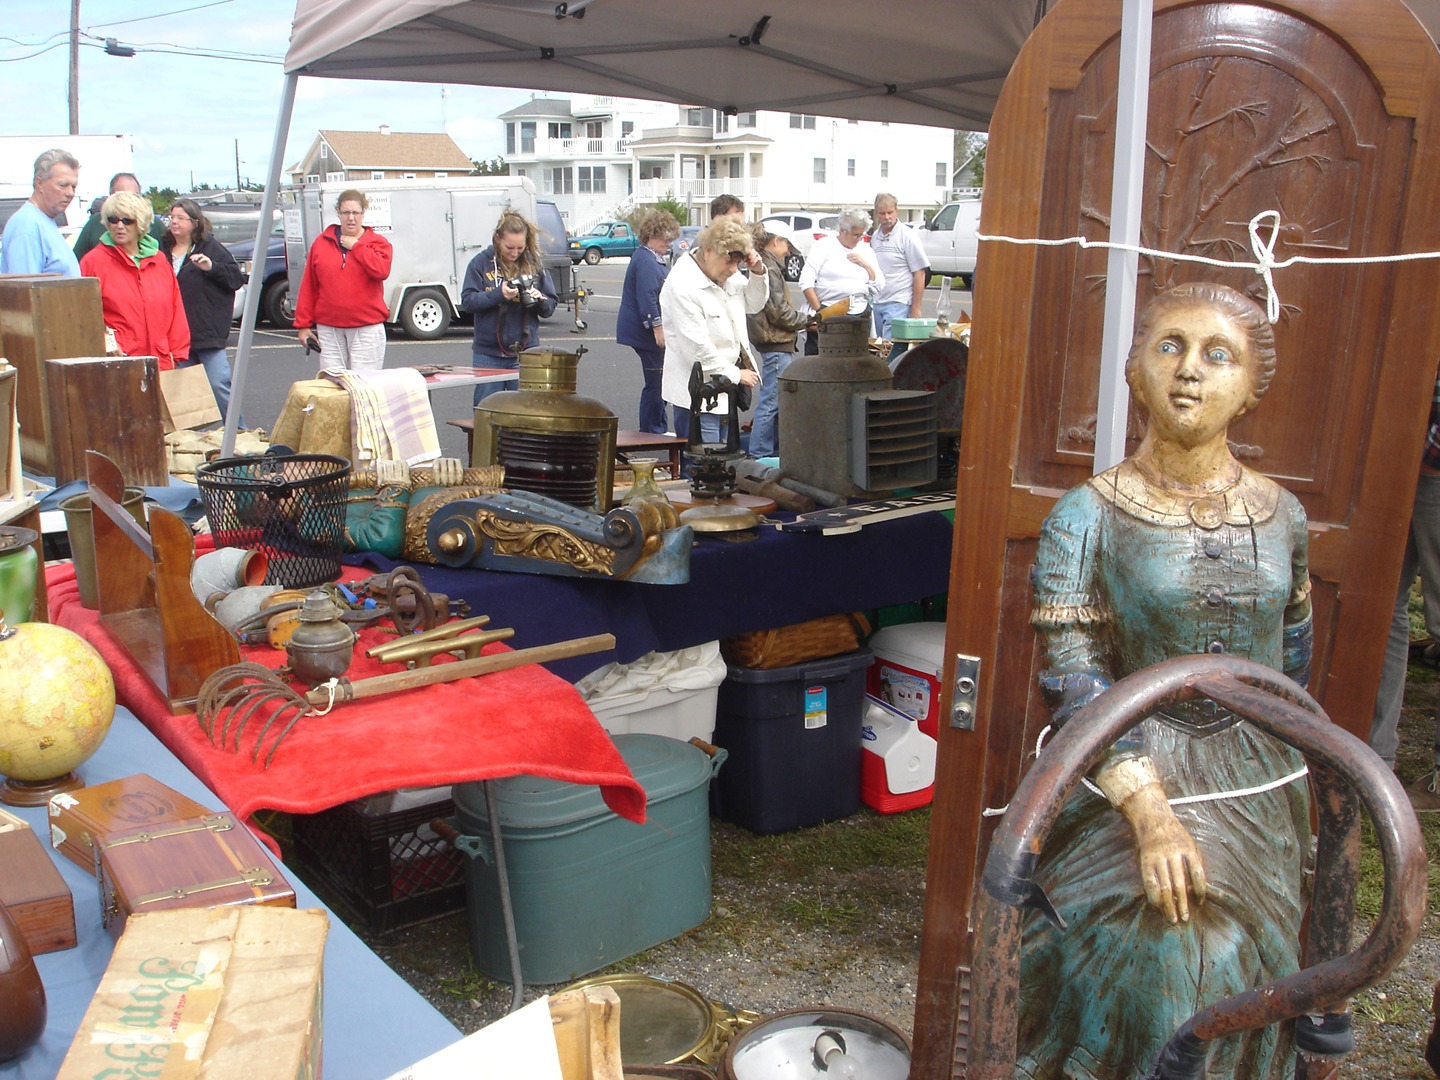 Viking Village Antique and Collectible Show